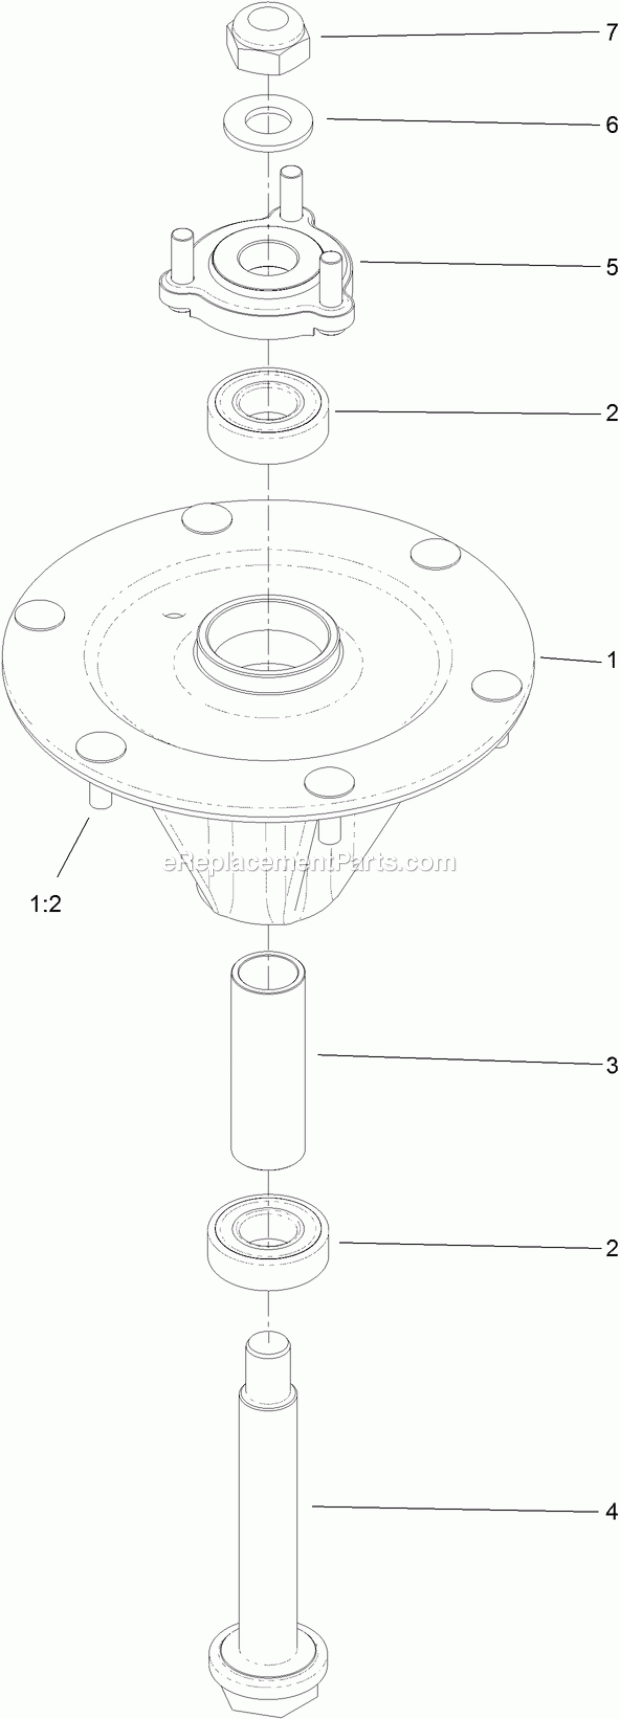 Toro 74504TE (316000001-316999999) Grandstand Mower, With 122cm Turbo Force Cutting Unit, 2016 Spindle Assembly No. 127-0560 Diagram